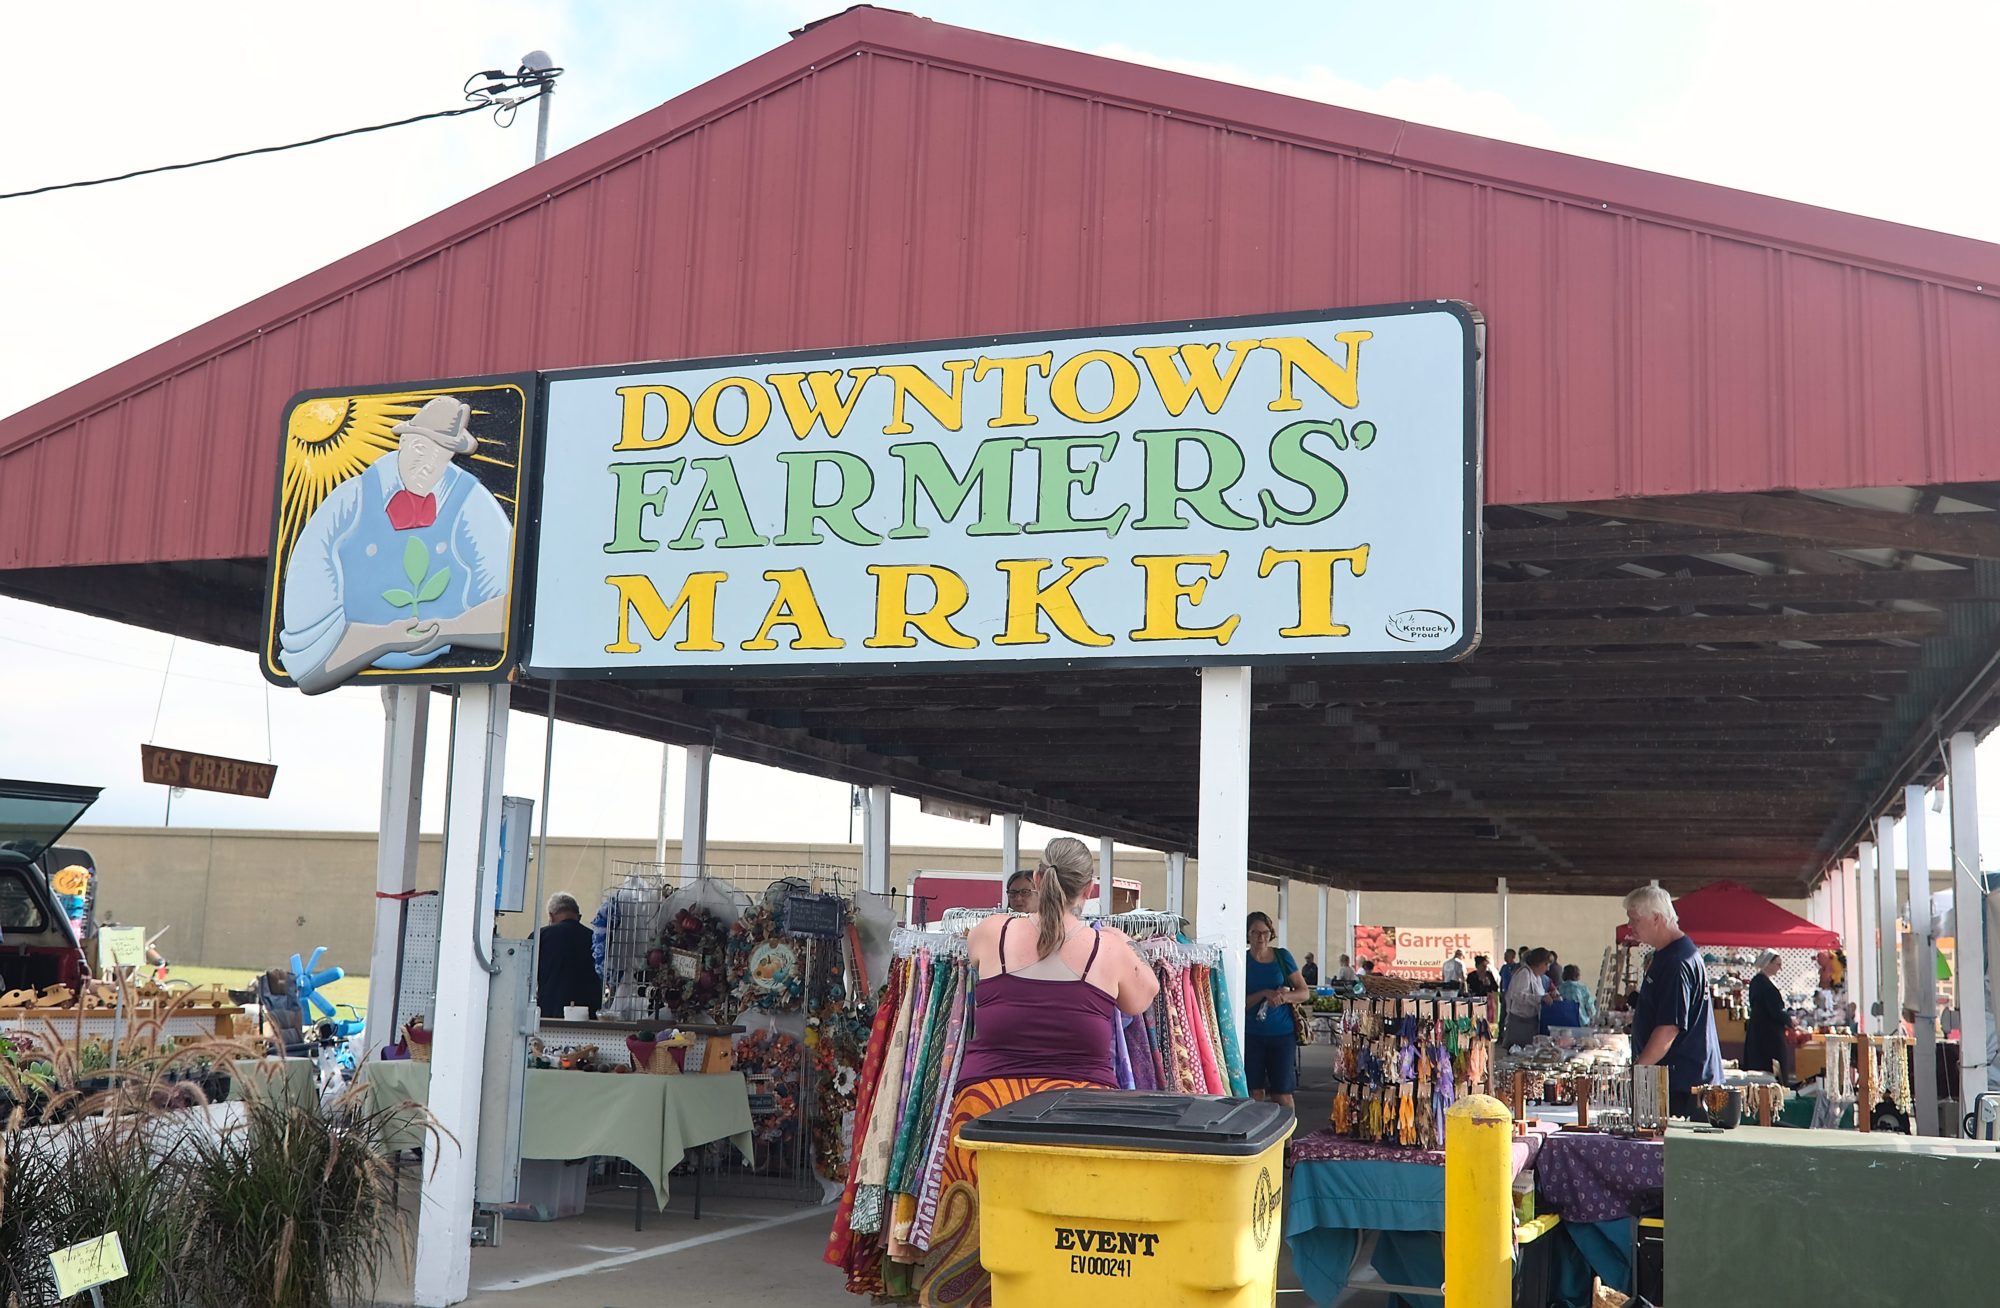 Vendors and shoppers at the Downtown Farmers' Market in Paducah